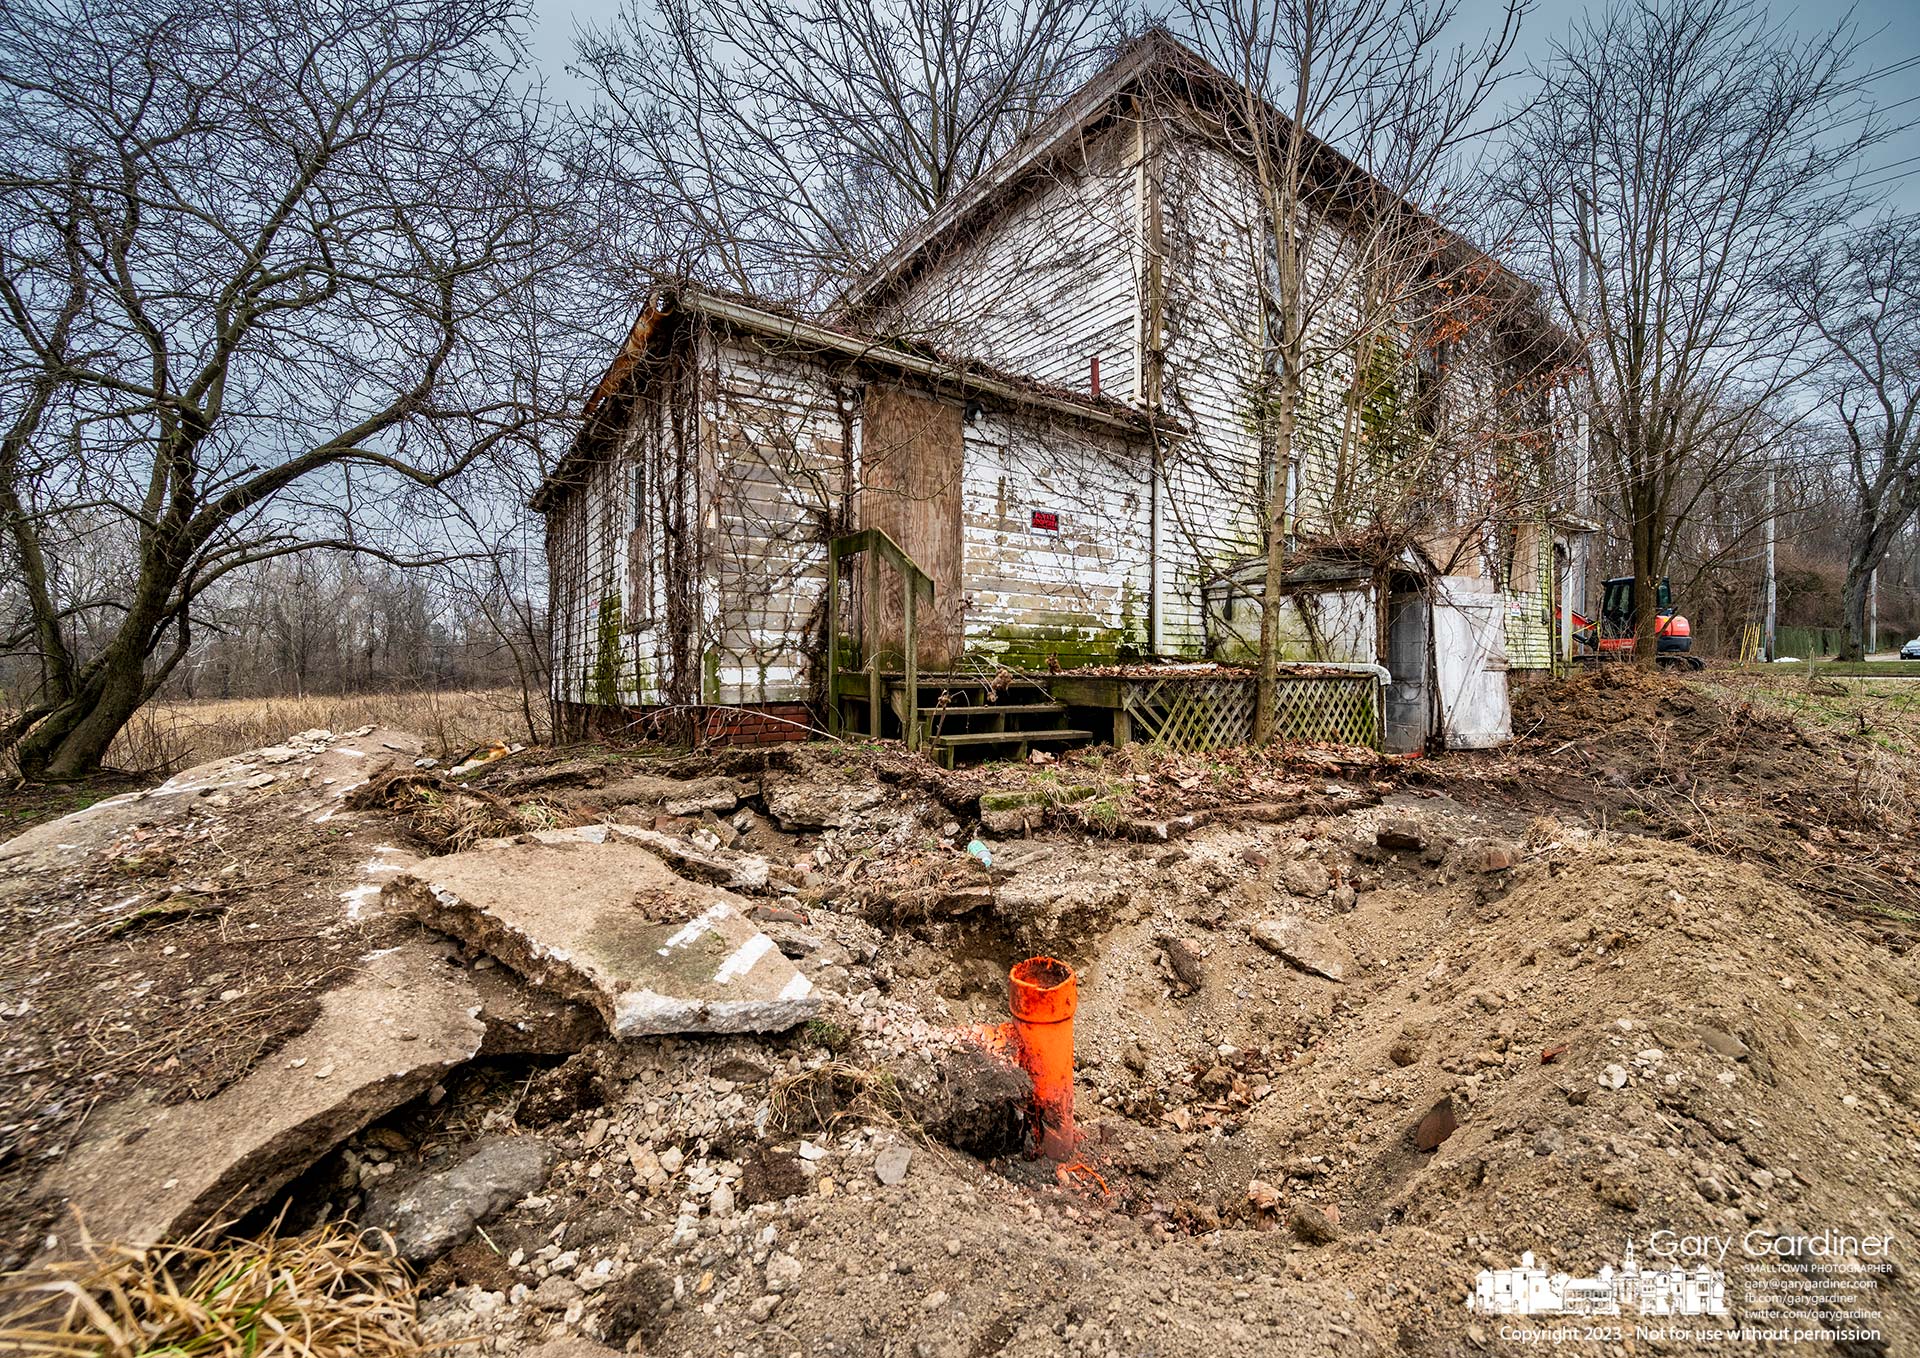 Contractors wait for final approval to demolish the Braun Farm barn and house where the utilities have been clearly marked for final inspection before tearing down the buildings. My final Photo for February 6, 2023.